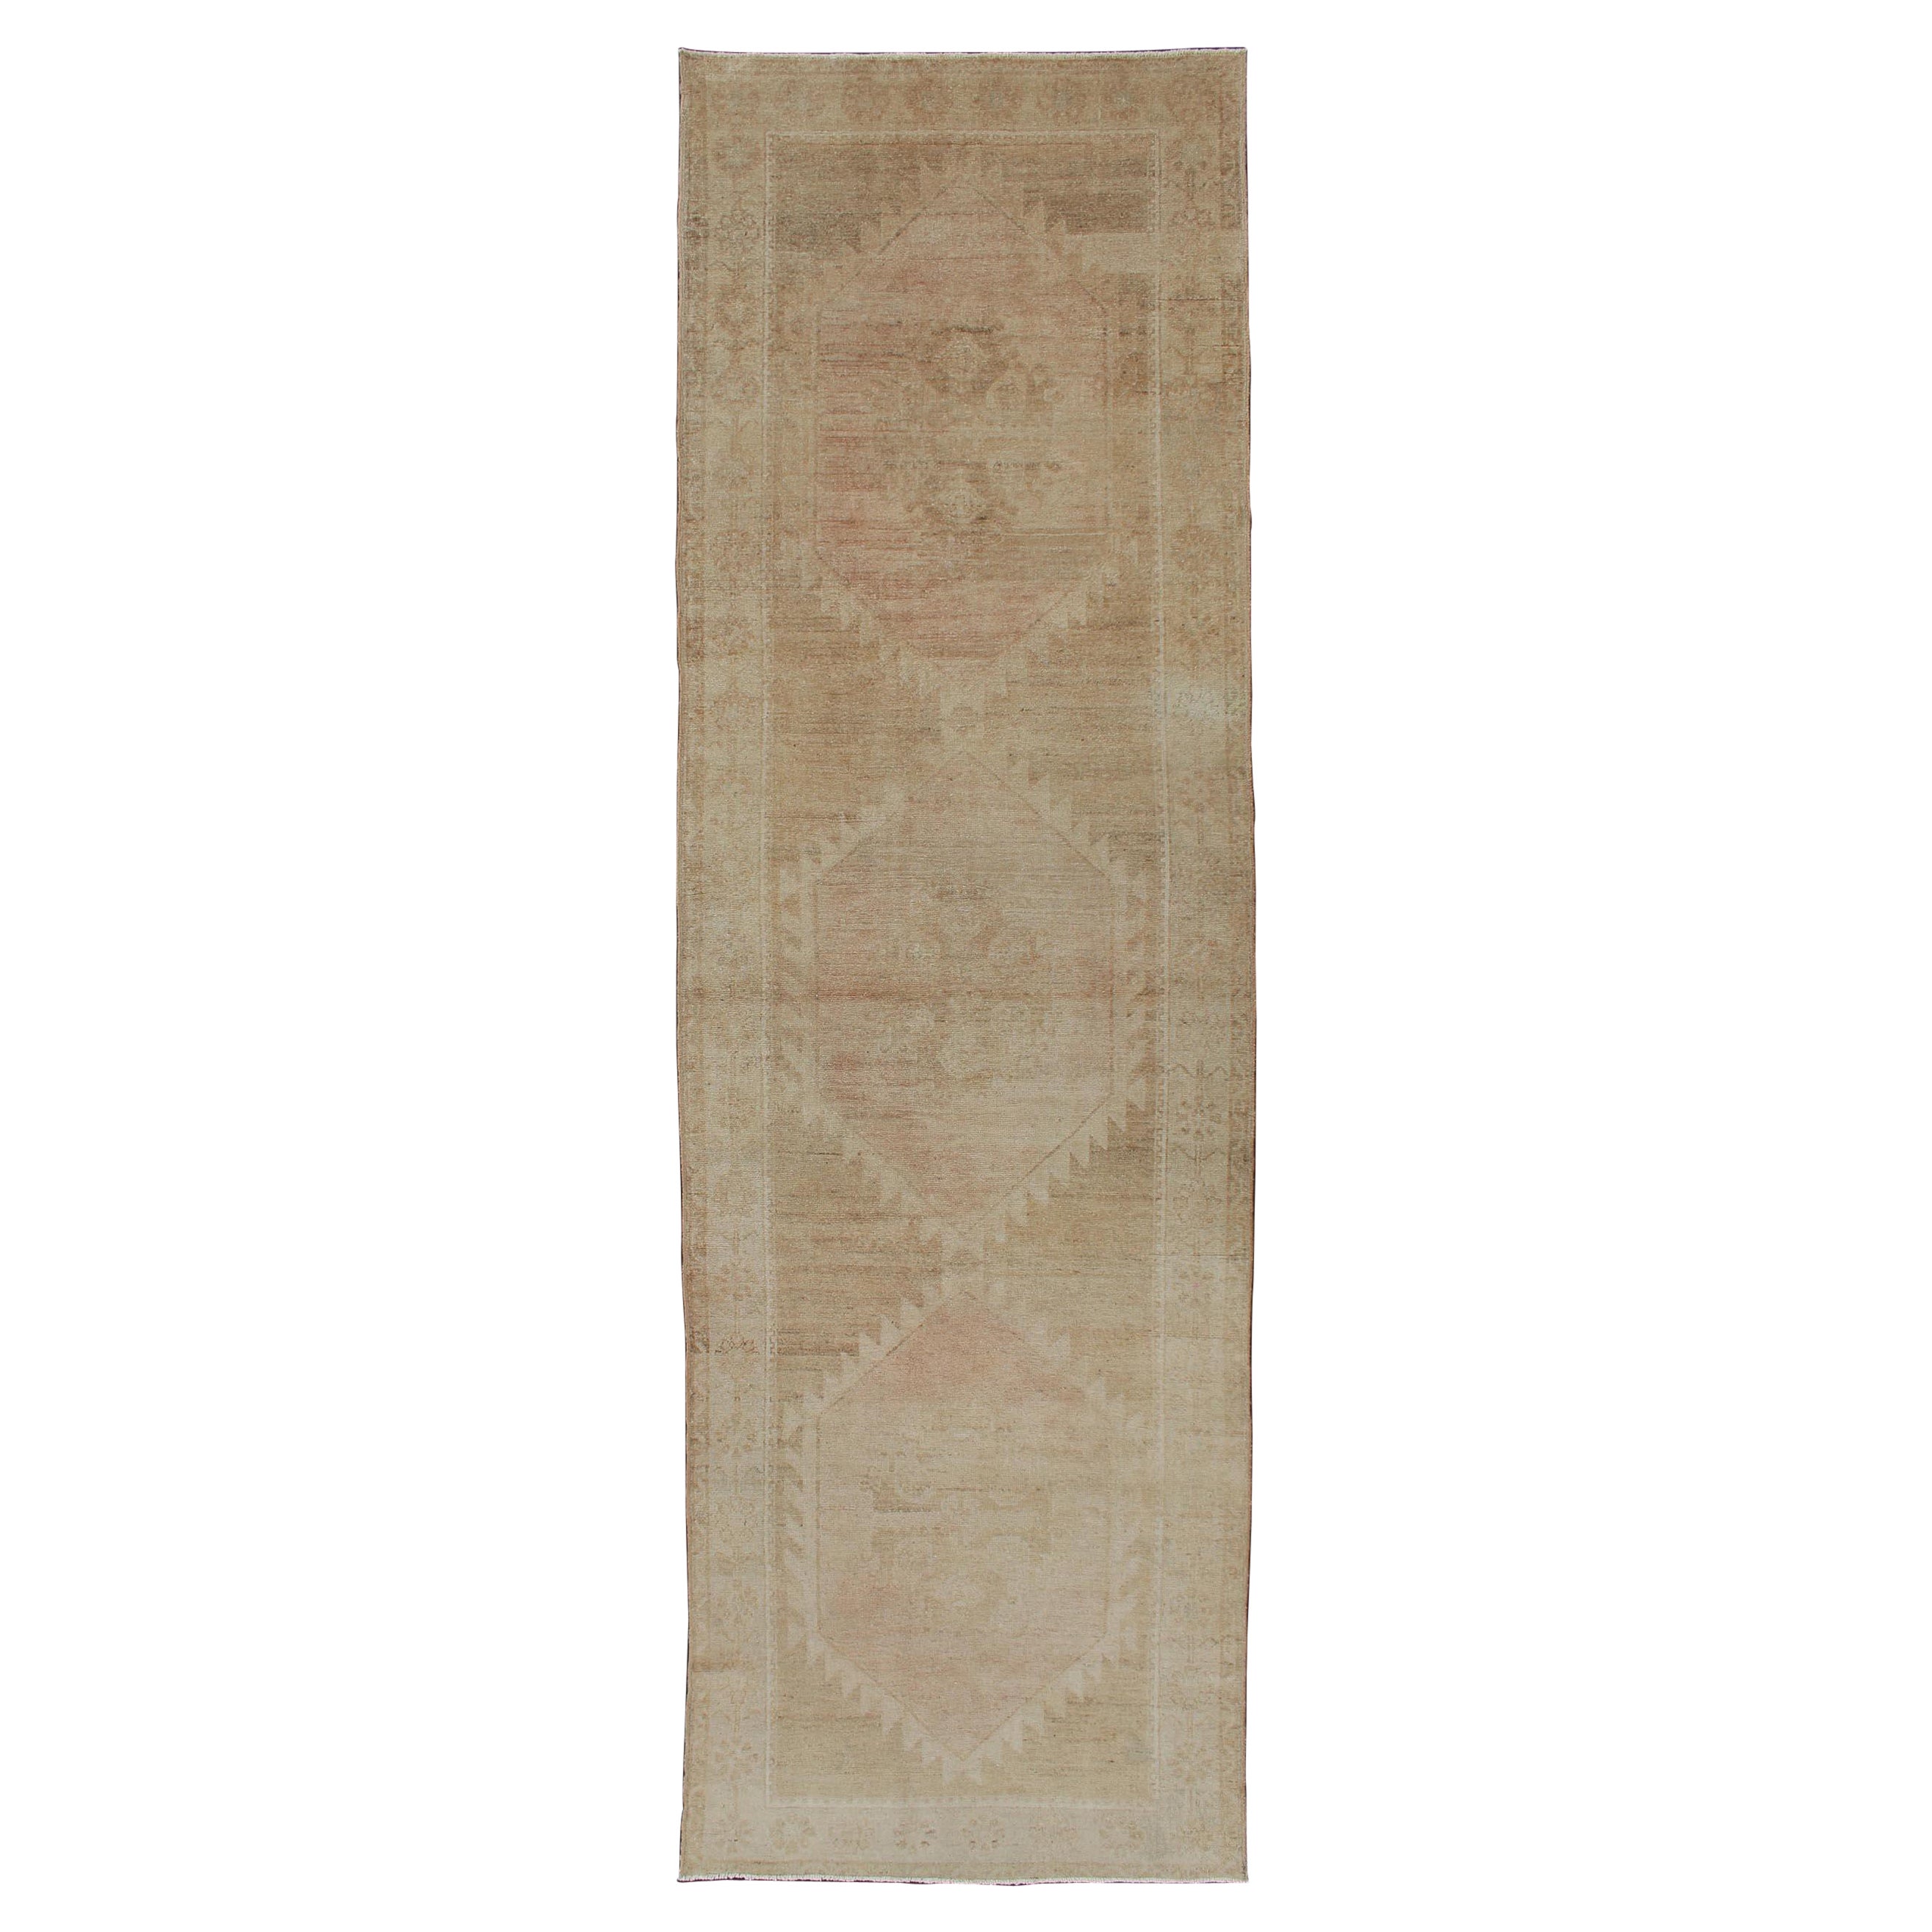 Vintage Turkish Oushak Runner Neutral Colors with Tribal Design in Earth Colors For Sale